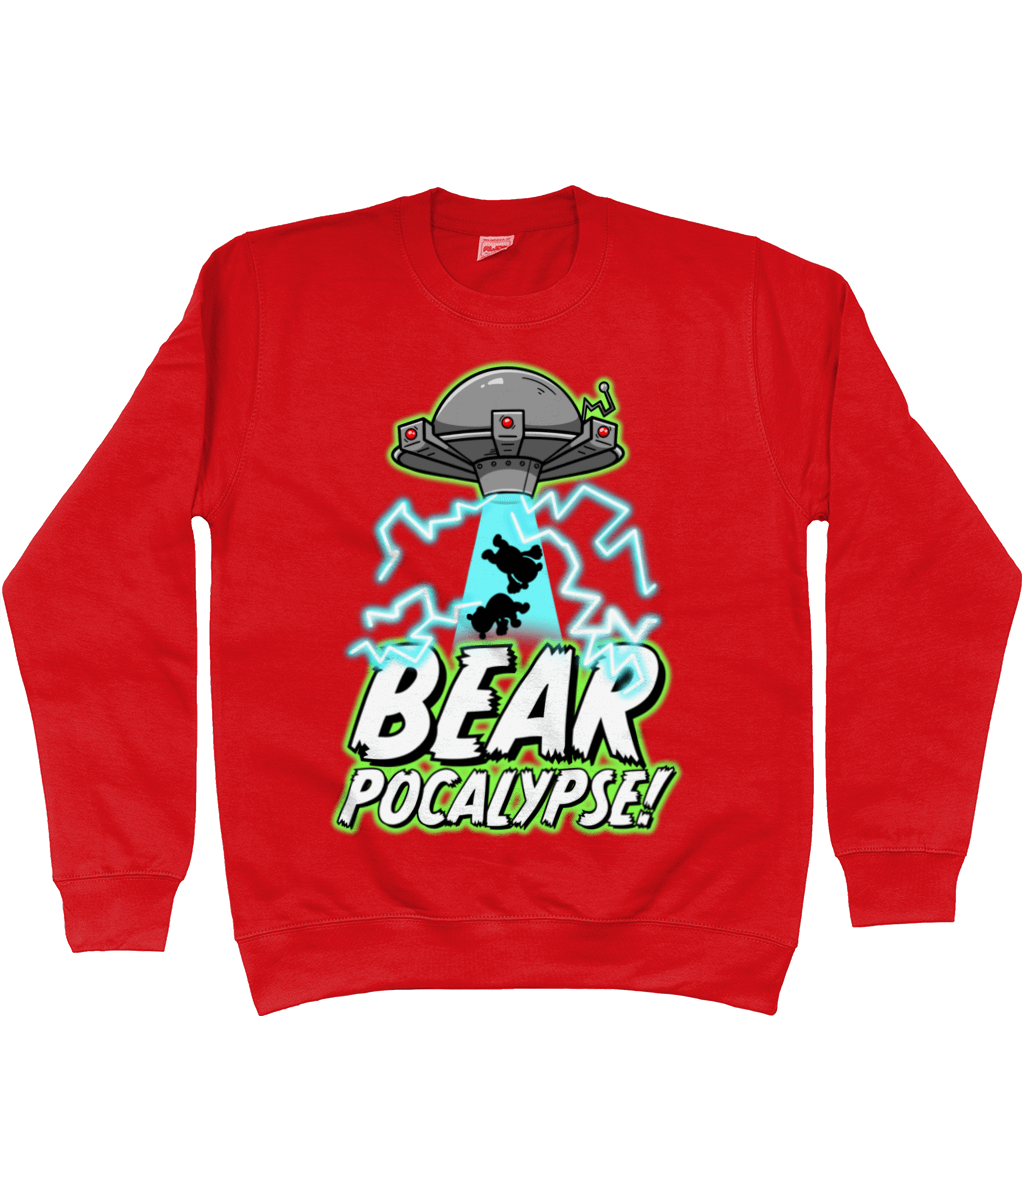 UFO with green glow hovers above bold white text which reads BEARPOCALYPSE! as it beams up the silhouettes of two bears and blue lightning crackles on a red sweatshirt